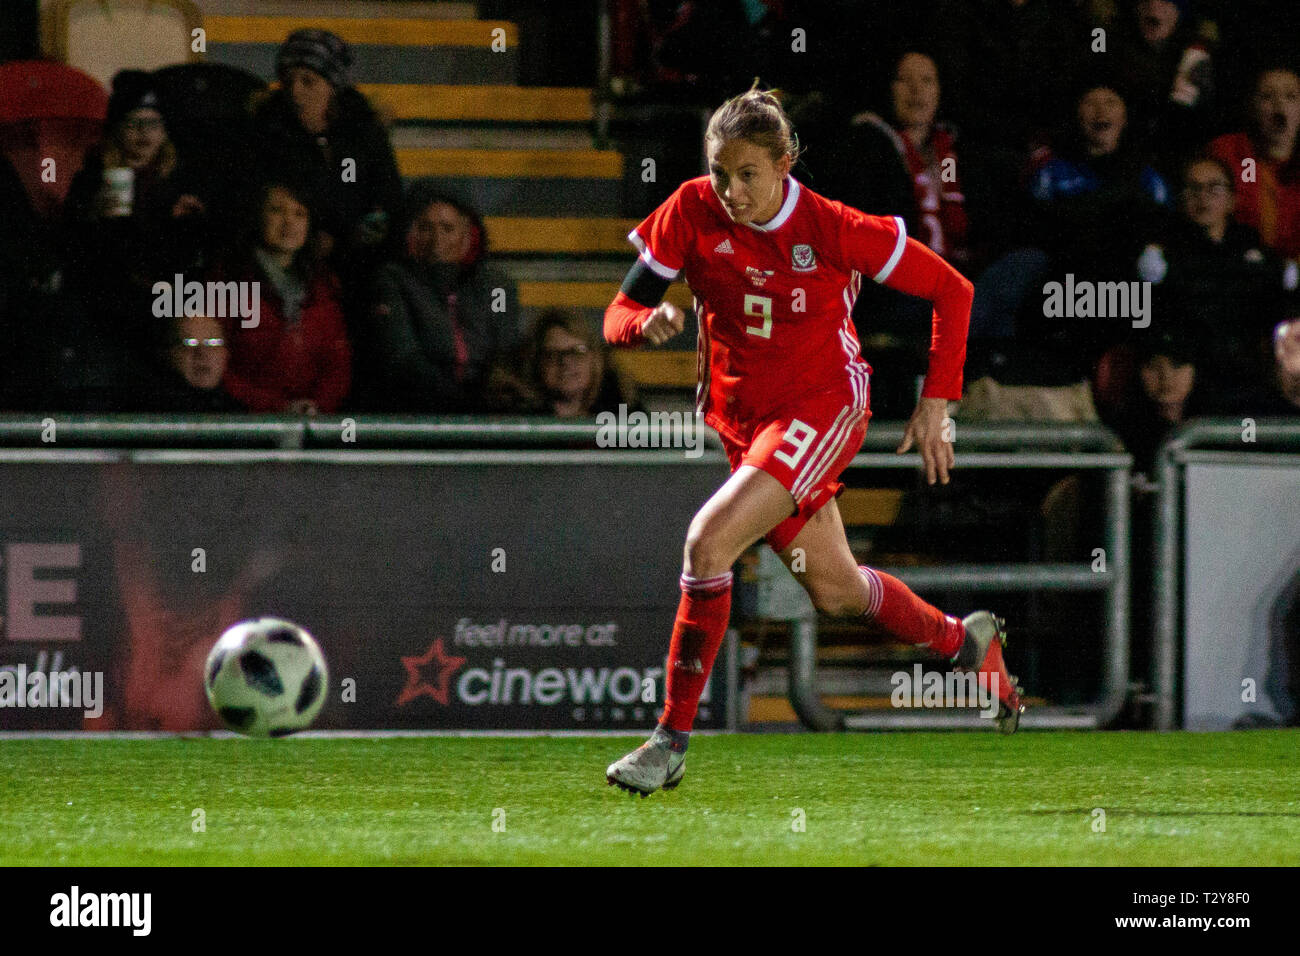 Kayleigh Green of Wales in action. Wales v Czech Republic at Rodney Parade, Newport. Credit: Lewis Mitchell/YCPD. Stock Photo